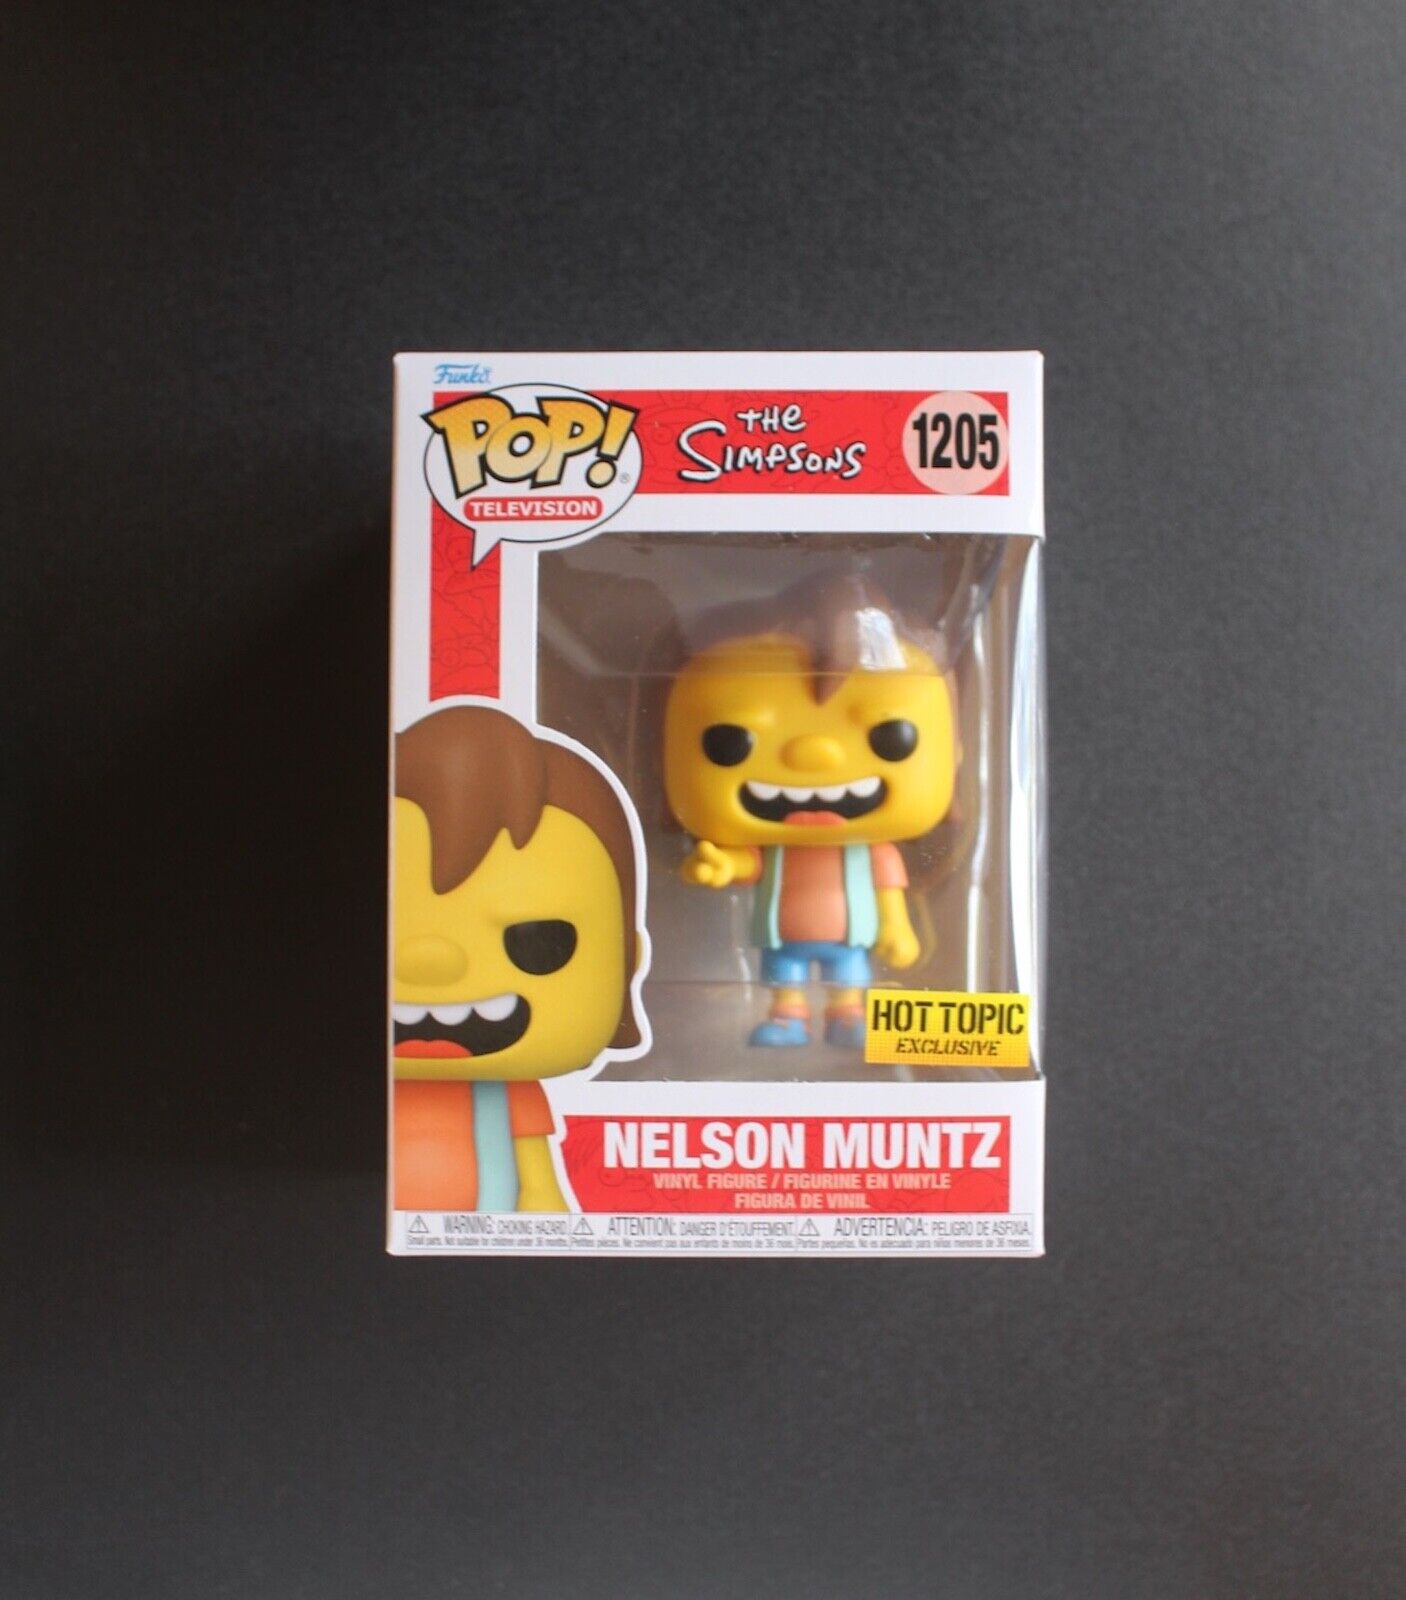 Nelson Muntz #1205 Funko Pop Television The Simpsons Hot Topic Exclusive 2021